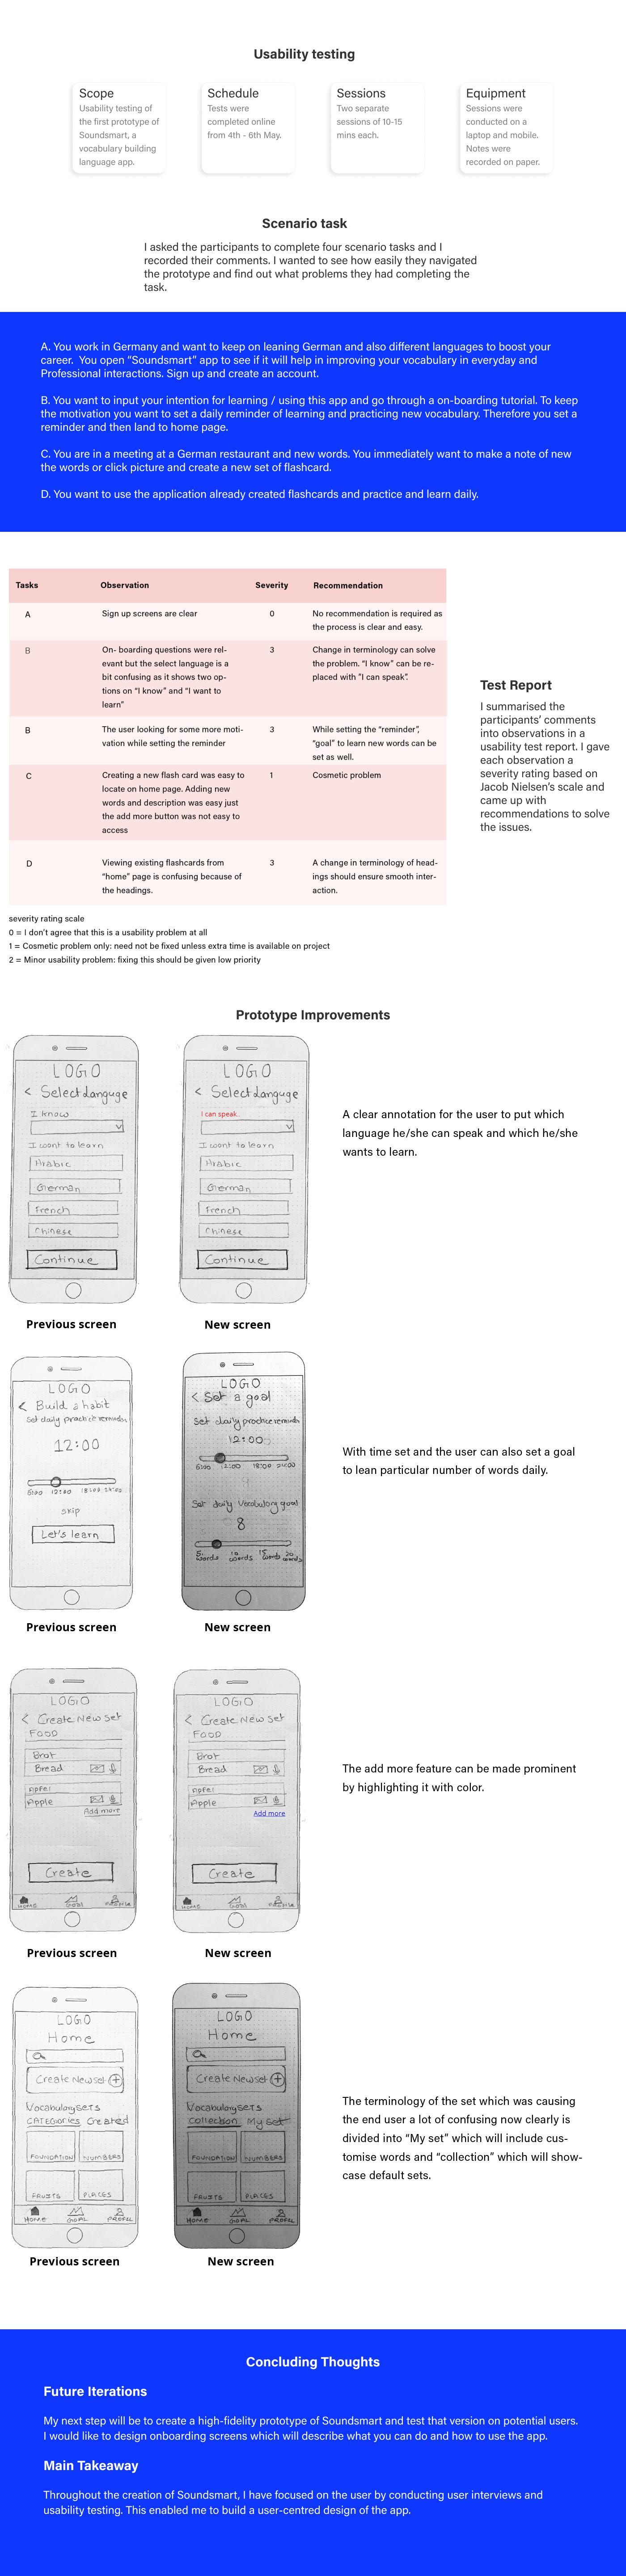 CaseStudy Figma Mobile app mobileapp research UI/UX user experience UX design UX Research